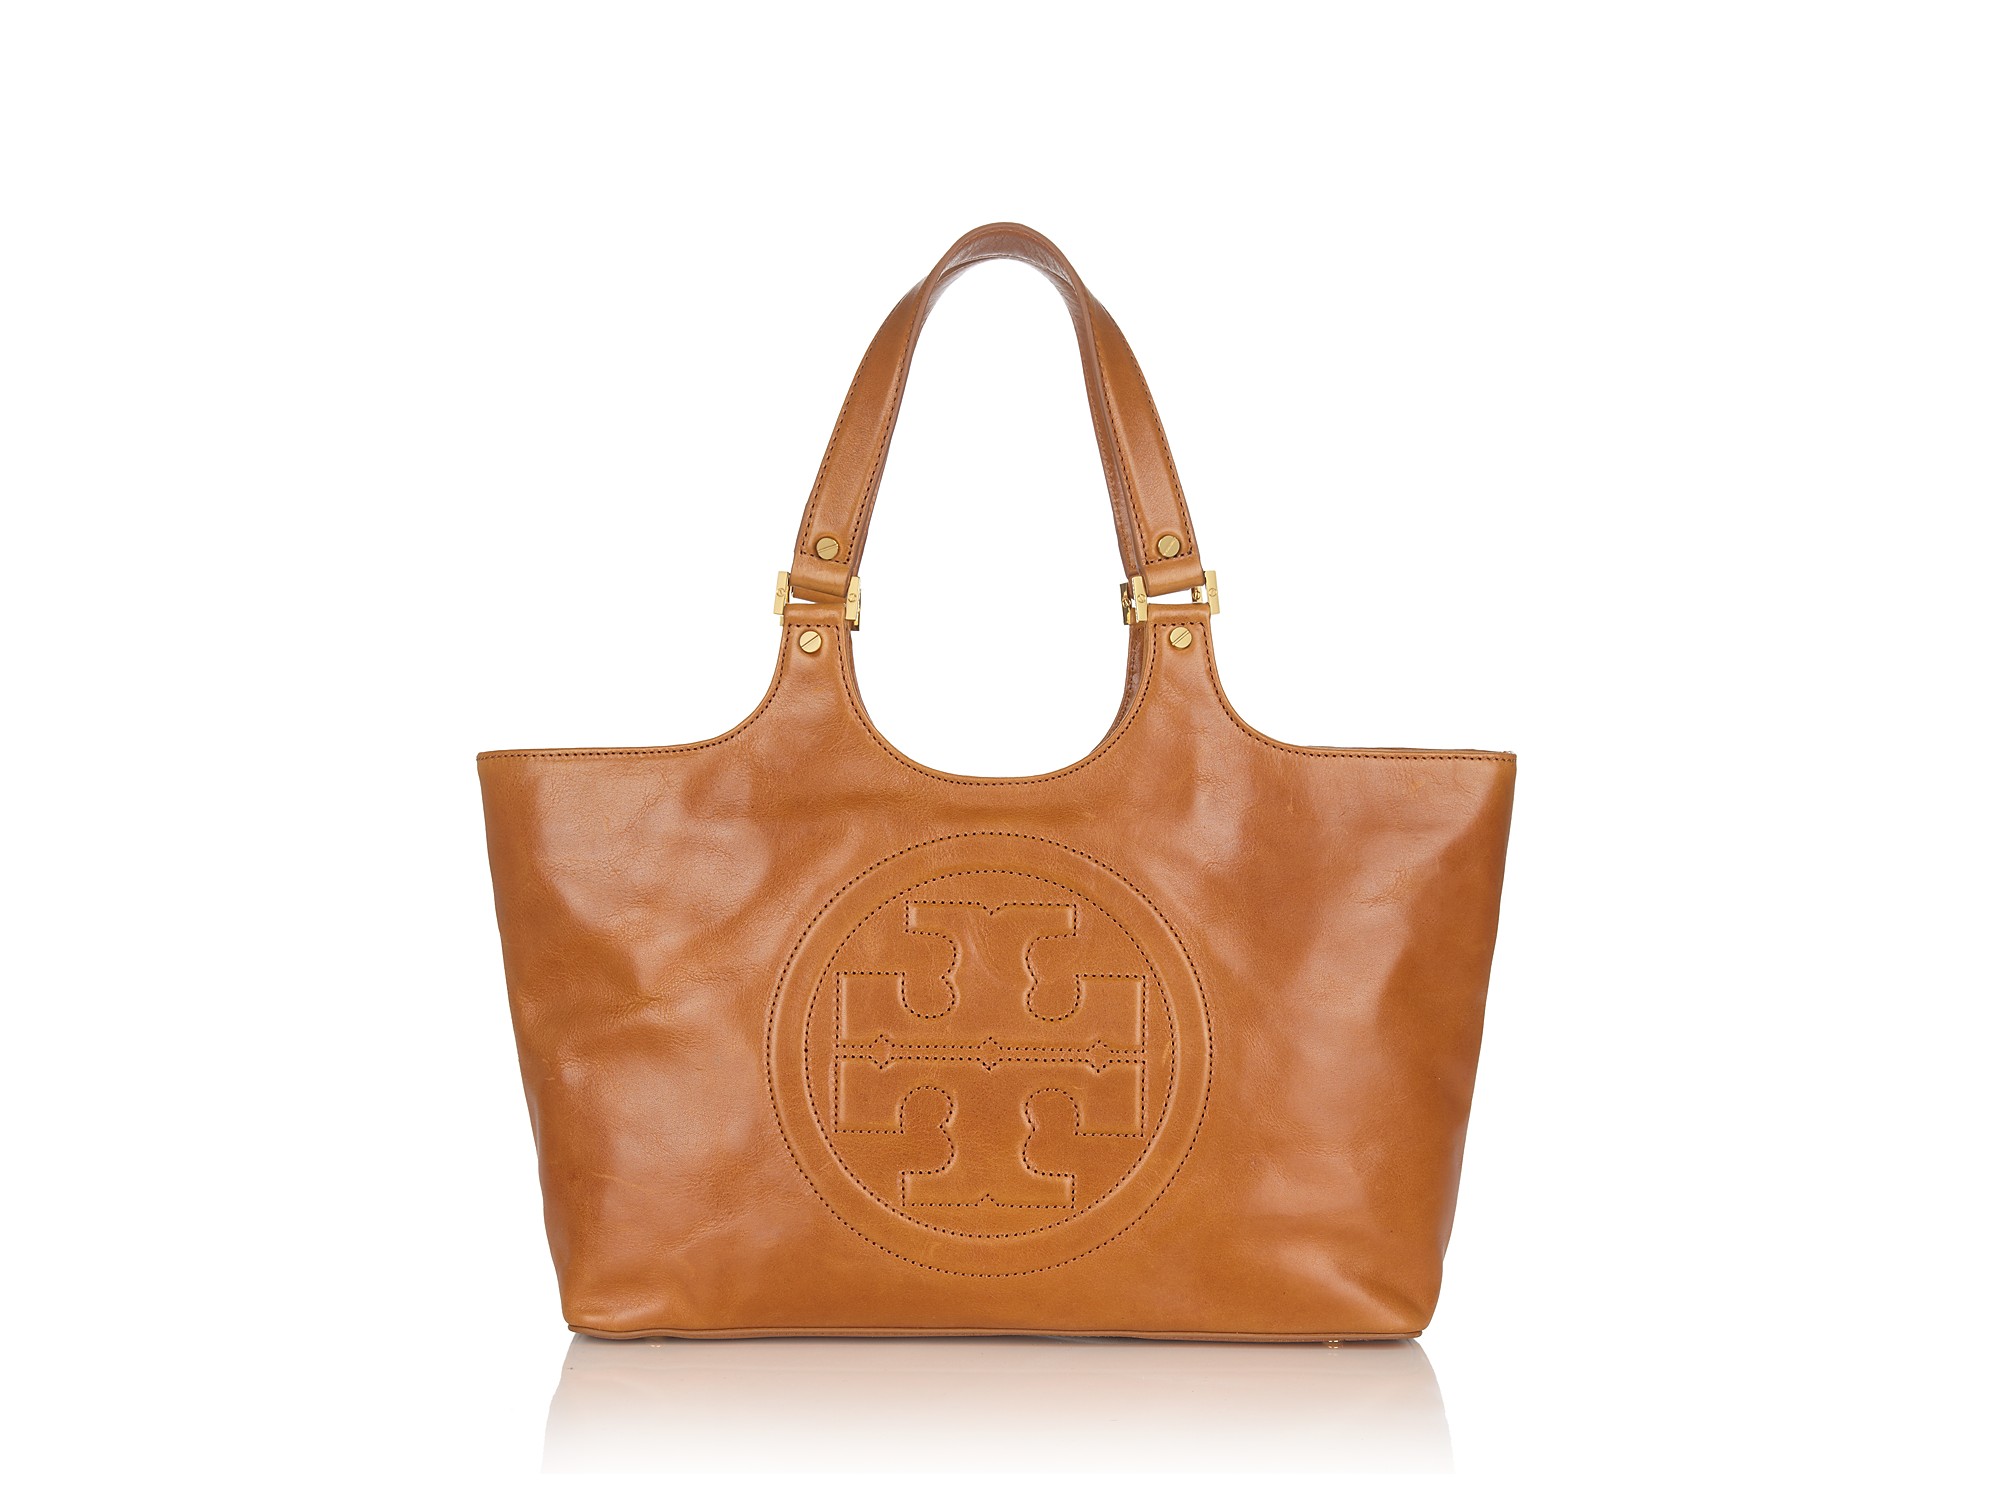 Tory Burch Burch Bombe Leather Tote in Tan (Brown) - Lyst